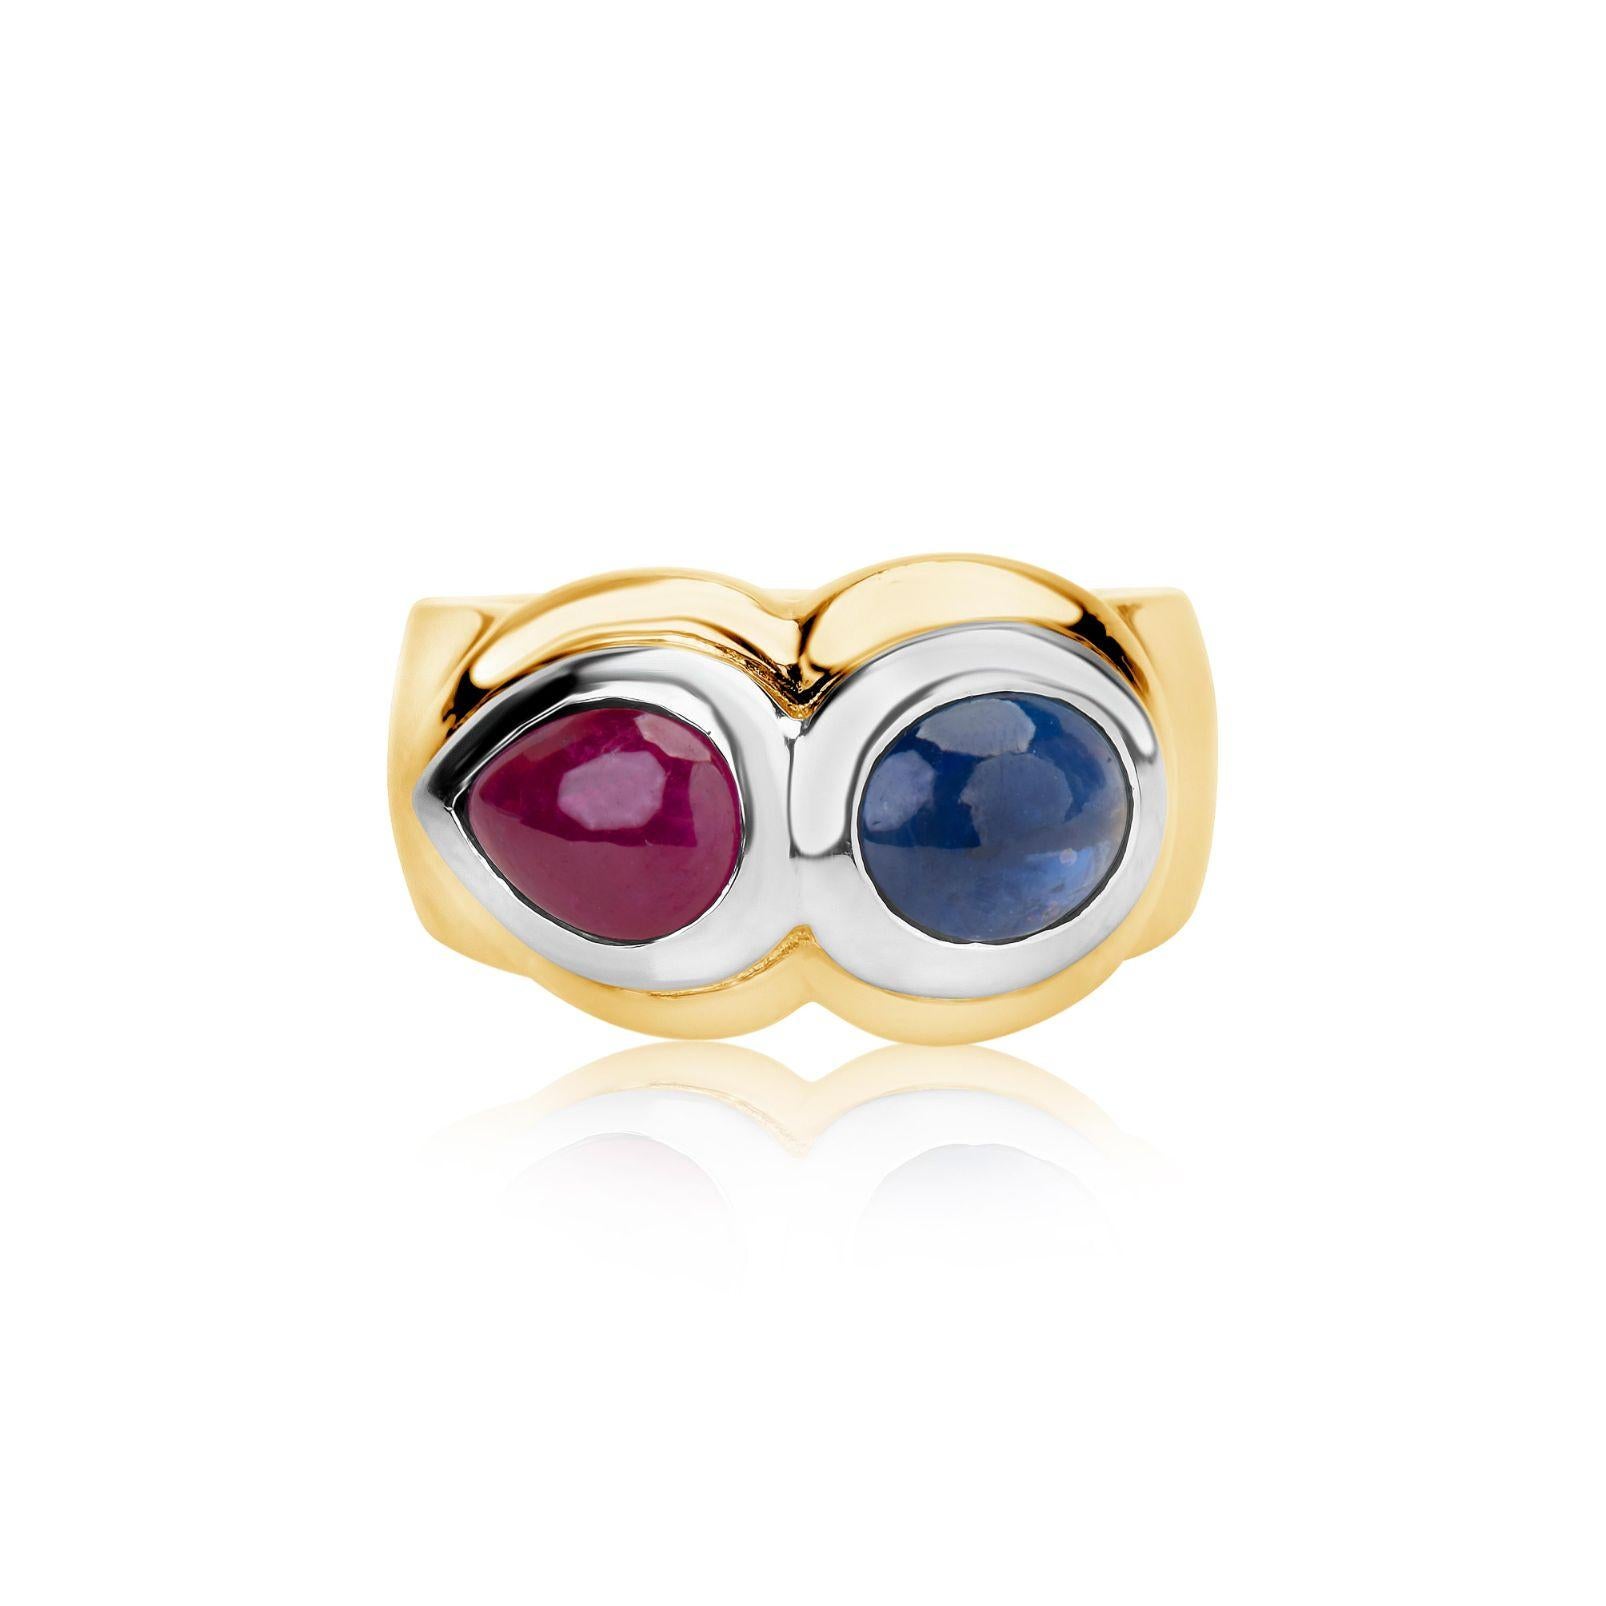 Andreoli Sapphire Ruby 18 Karat Two-Tone Gold Ring

This ring features:
- 2.08 Carat Blue Sapphire
- 1.70 Carat Ruby
- 9.85 Gram 18K Two-Tone Gold
- Made In Italy